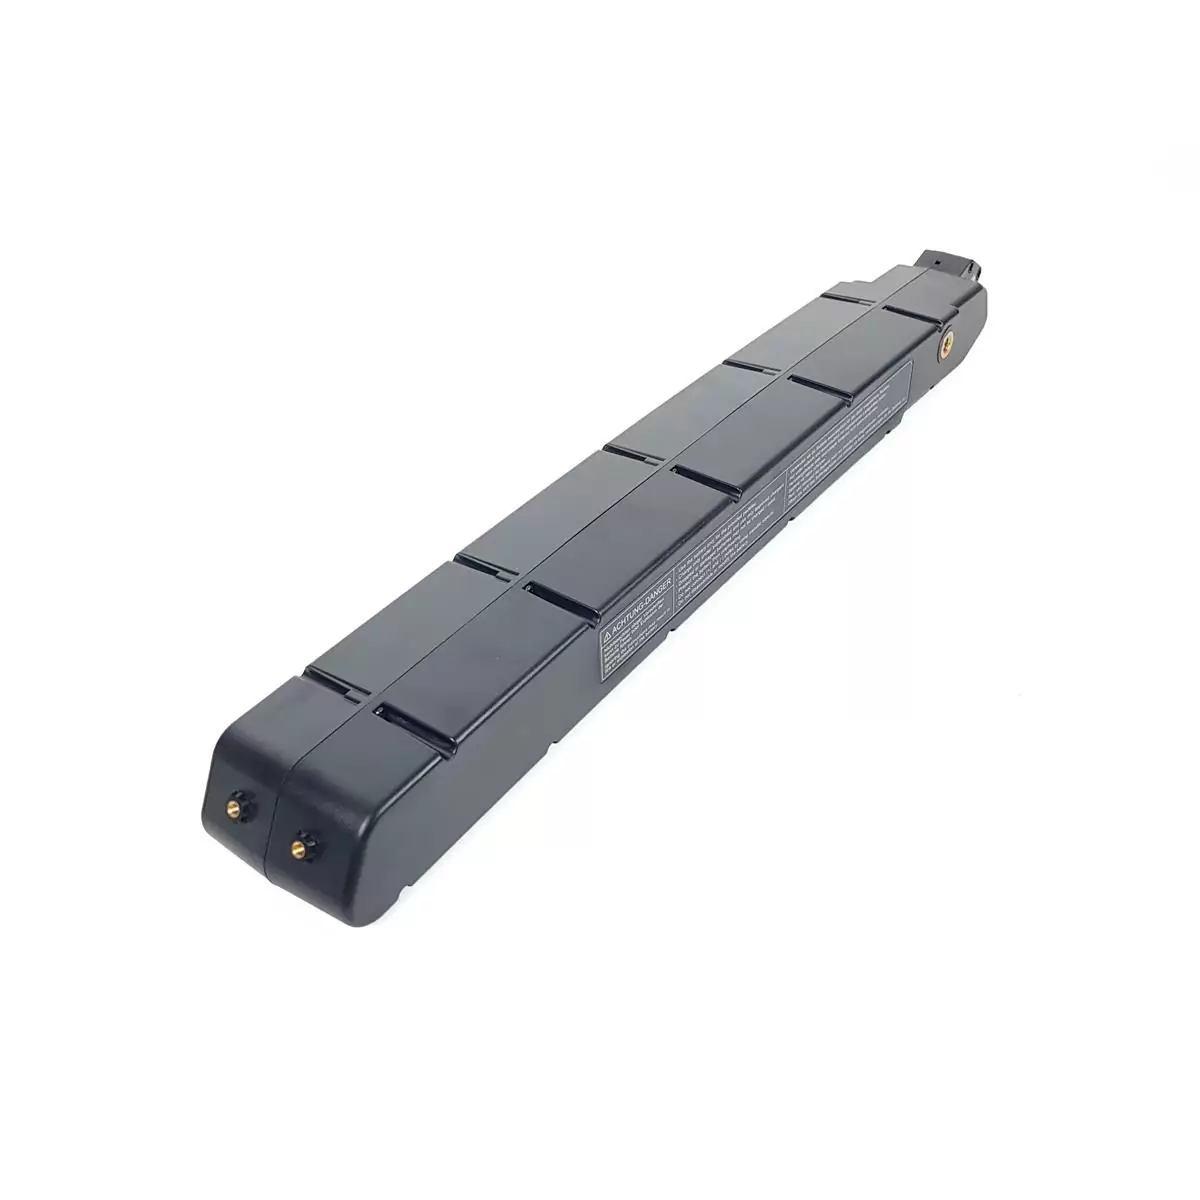 Original spare battery 720Wh 36V 19.6Ah for Jam2 7 series from 2022 - image